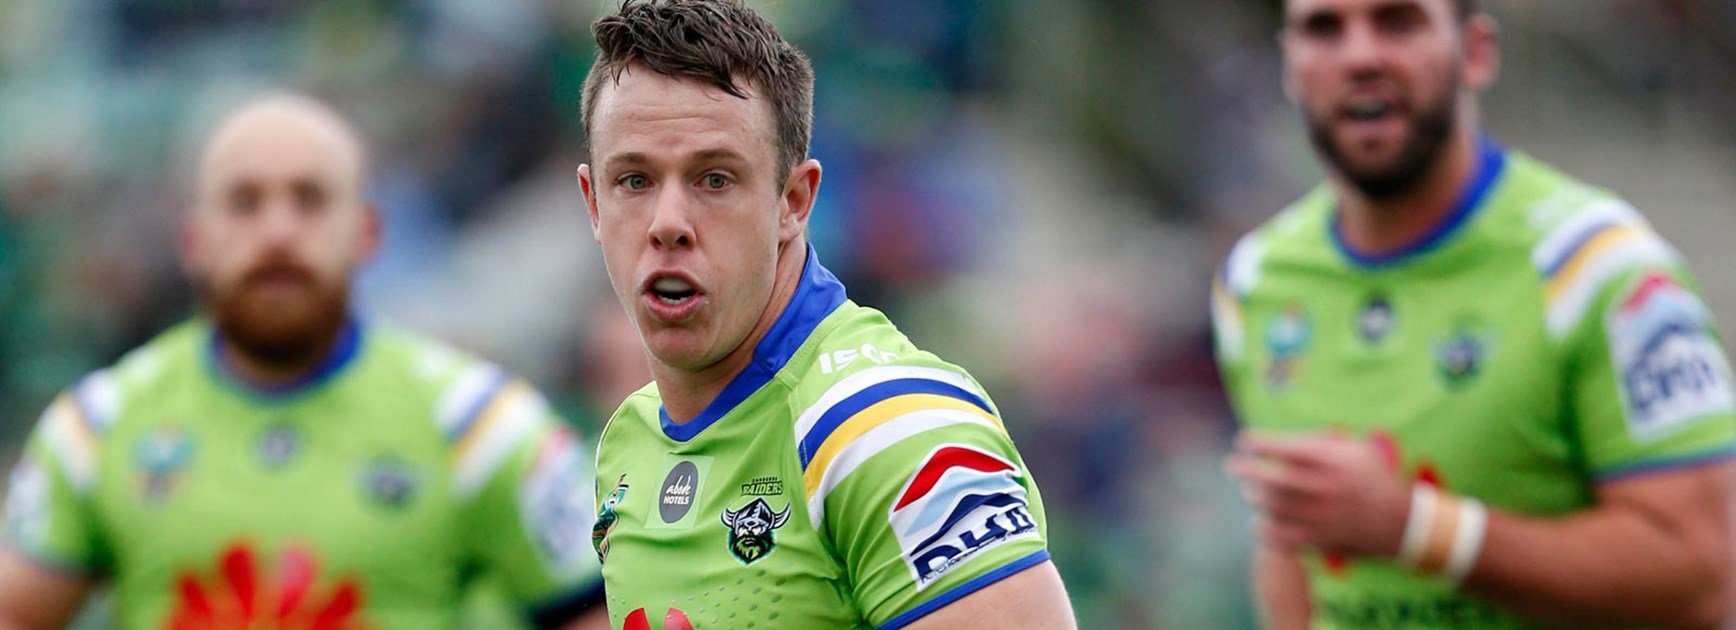 Sam Williams was a big part of Canberra's Round 9 win, according to halves partner Blake Austin.